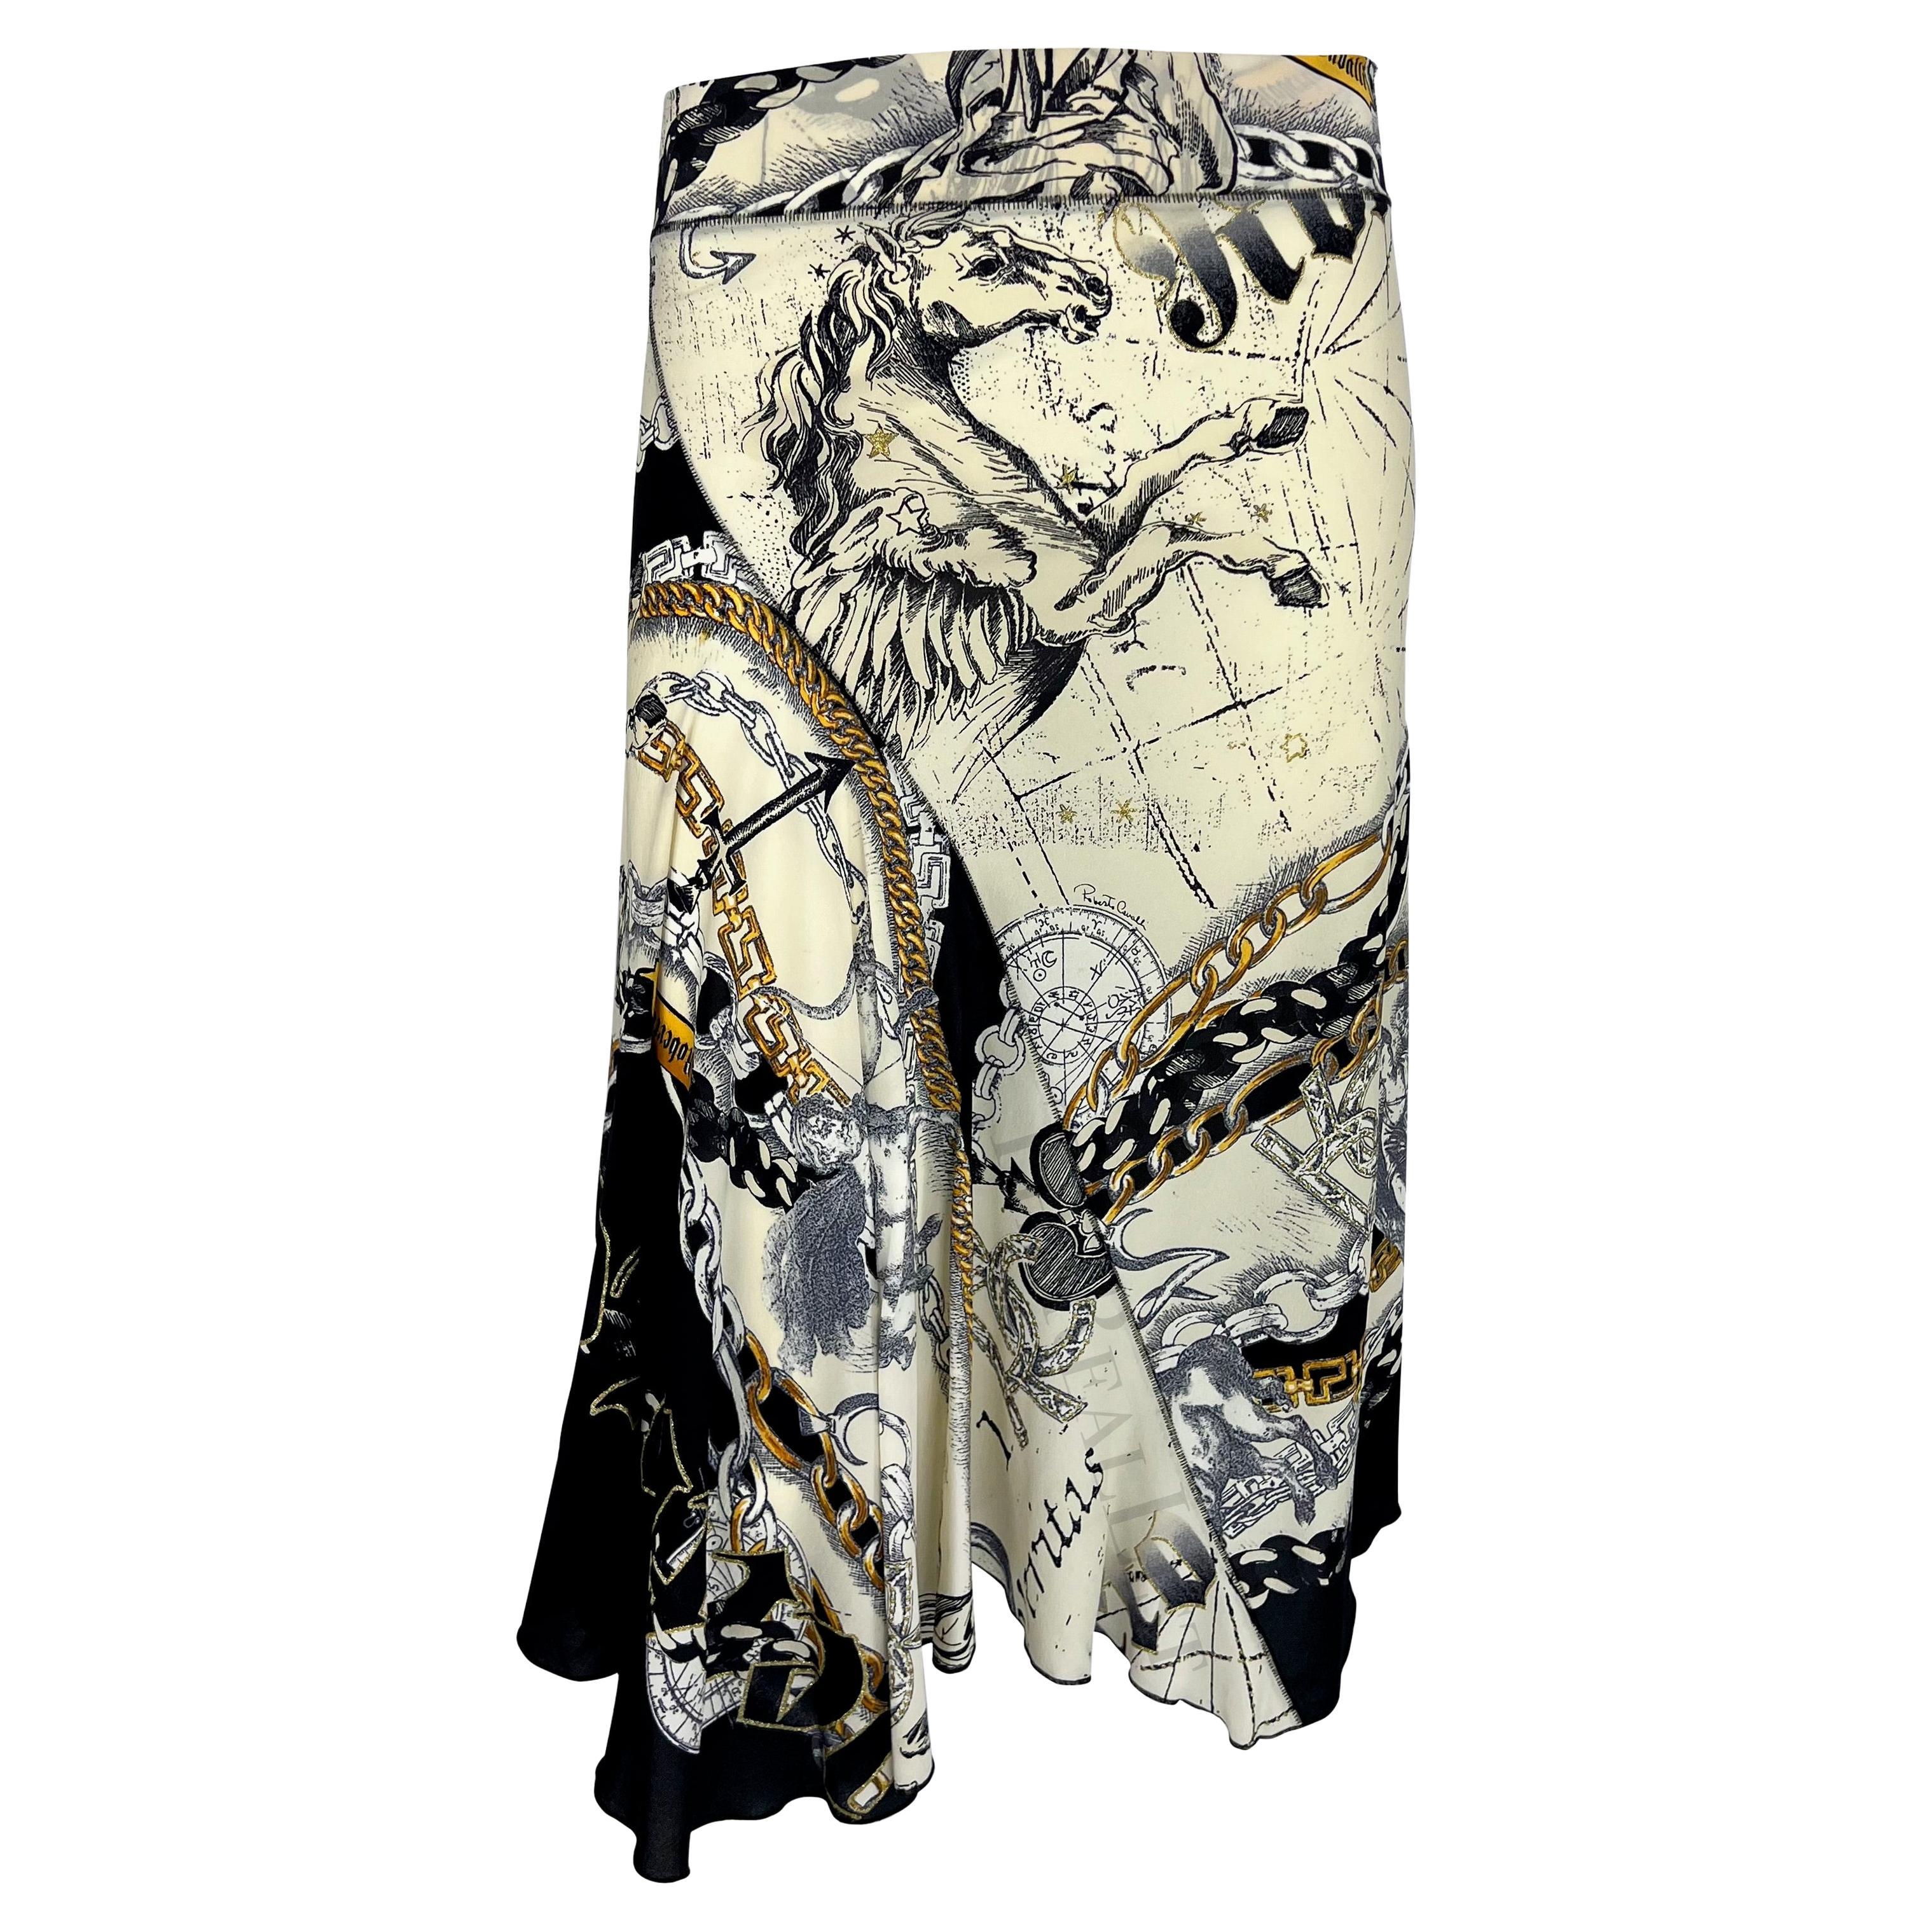 Presenting an incredible horoscope print Roberto Cavalli handkerchief flare skirt. From 2003, this sought-after print features constellations and depicts some of the horoscope signs. 

Approximate measurements:
Size - S
Waistband to hem: 27